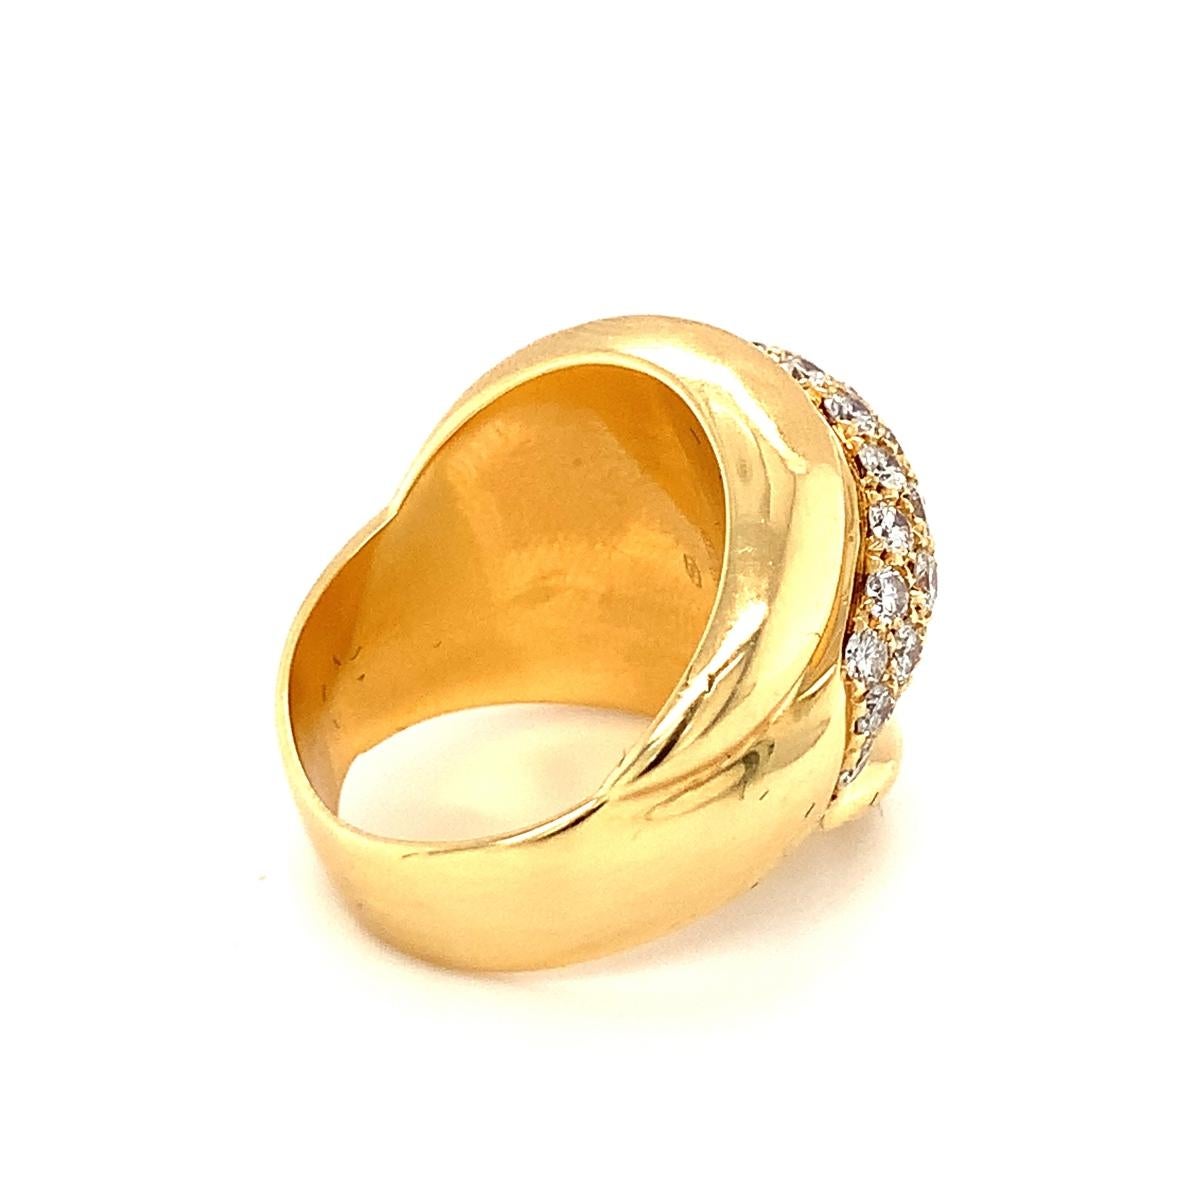 Pave Diamond Bombe 18K Yellow Gold Ring, circa 1970s In Good Condition For Sale In Beverly Hills, CA